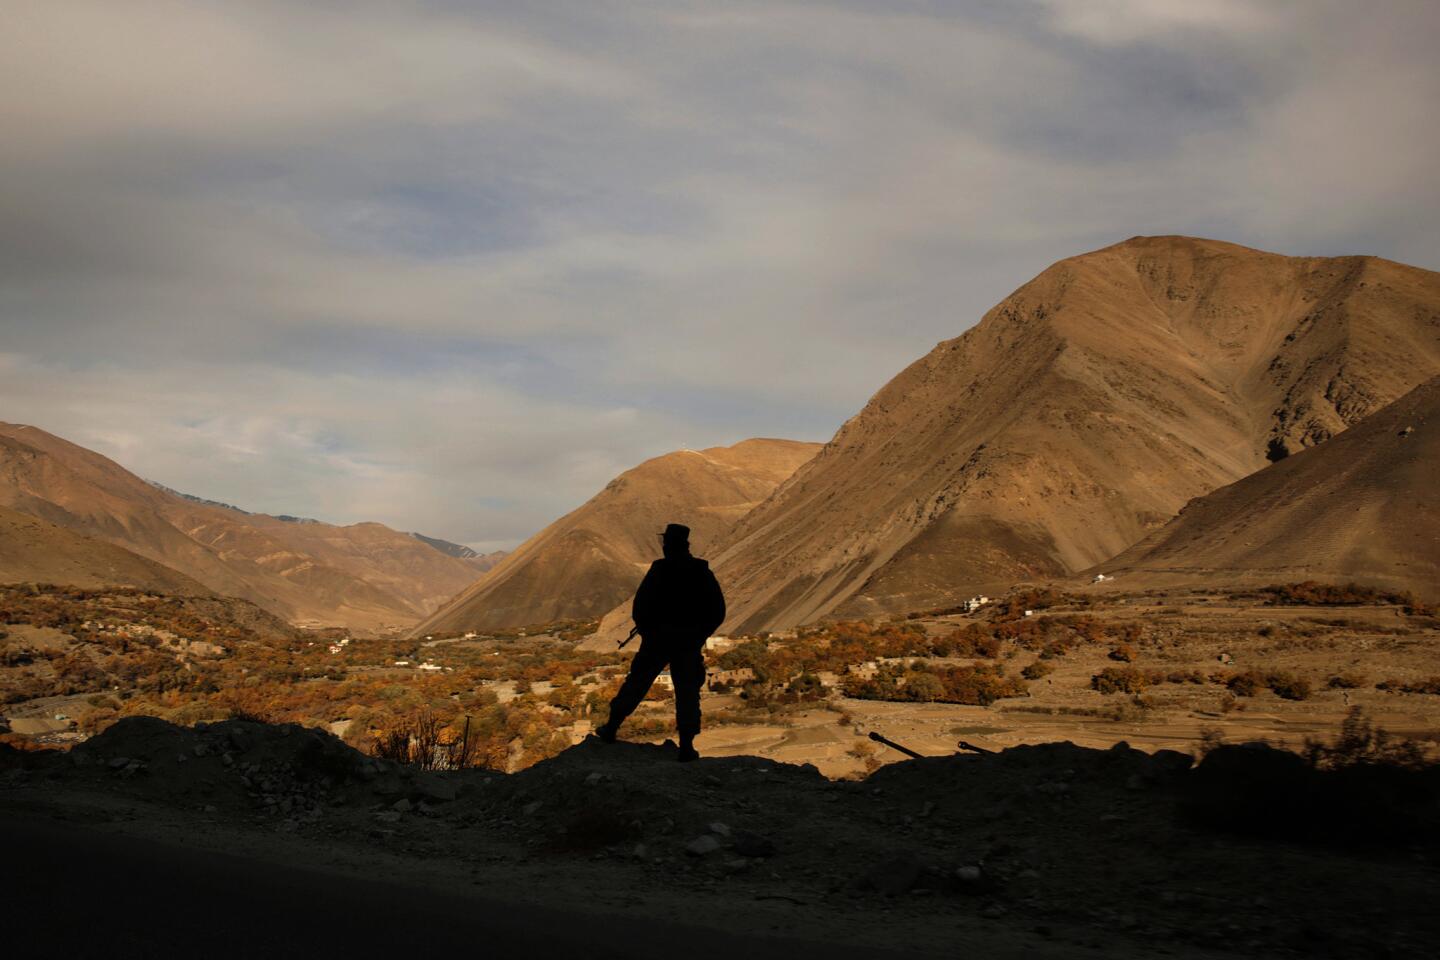 An Afghan soldier looks out over the Panjshir Valley, in the country's northeast. Panjshir is one of only two provinces never conquered by the Taliban.